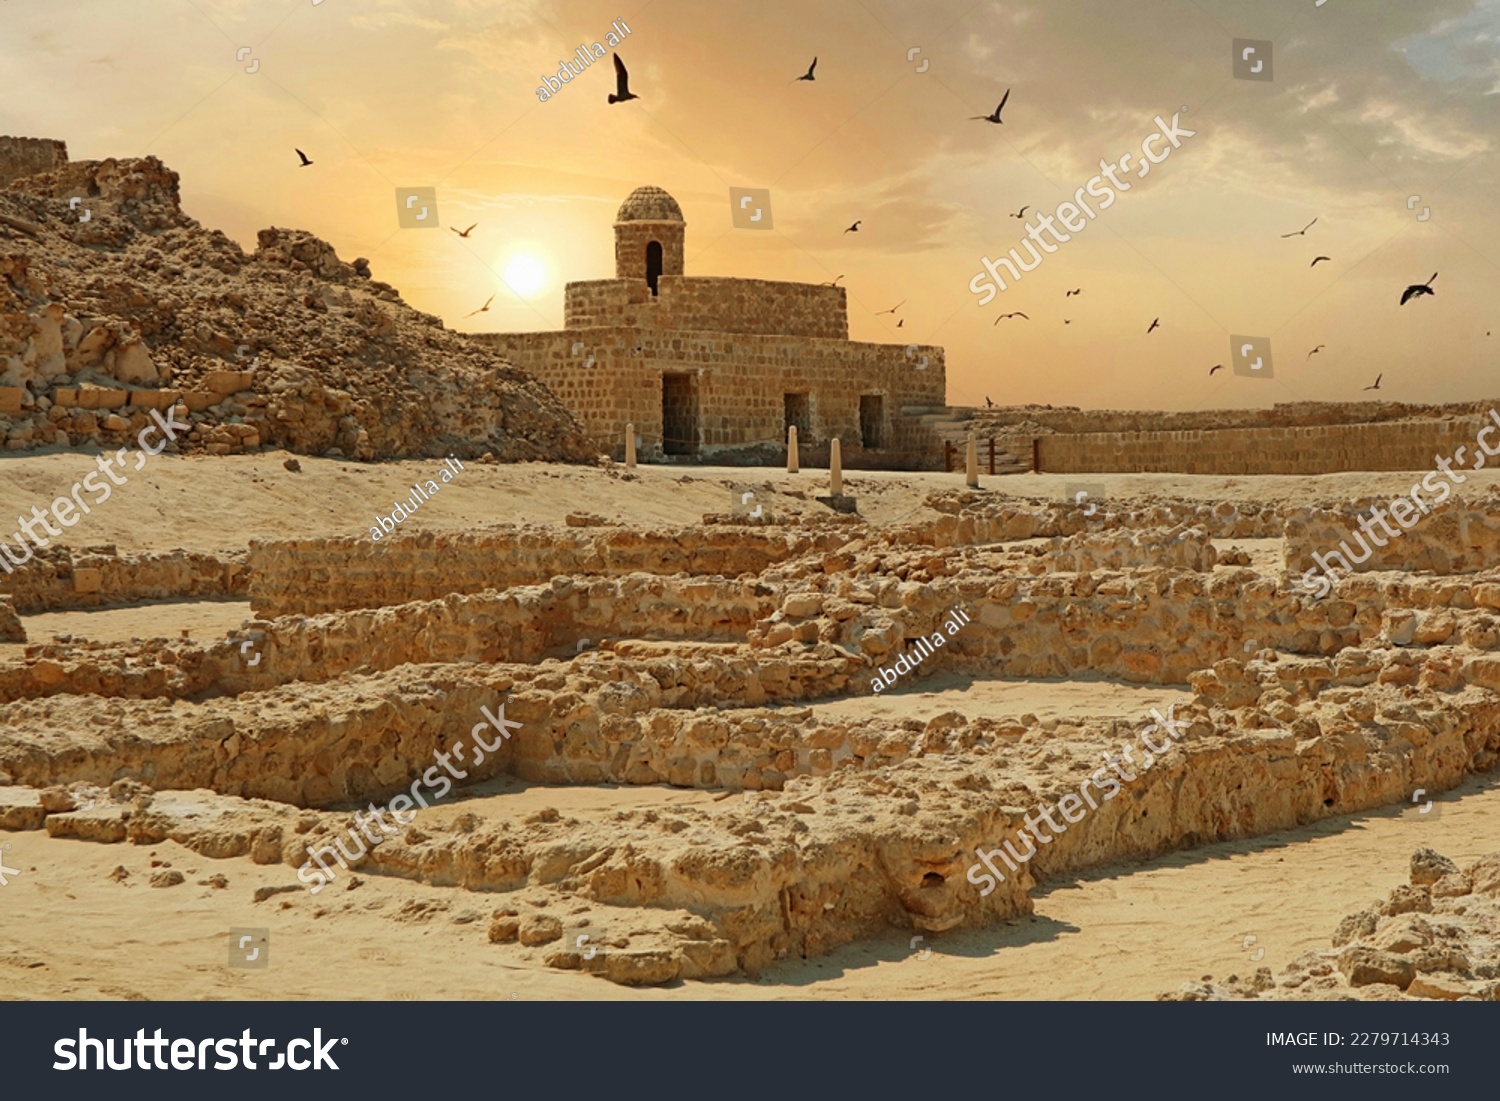 Remains of the Qal'at al-Bahrain Or the Portuguese Fort, UNESCO World Heritage Site in Manama, Bahrain #2279714343